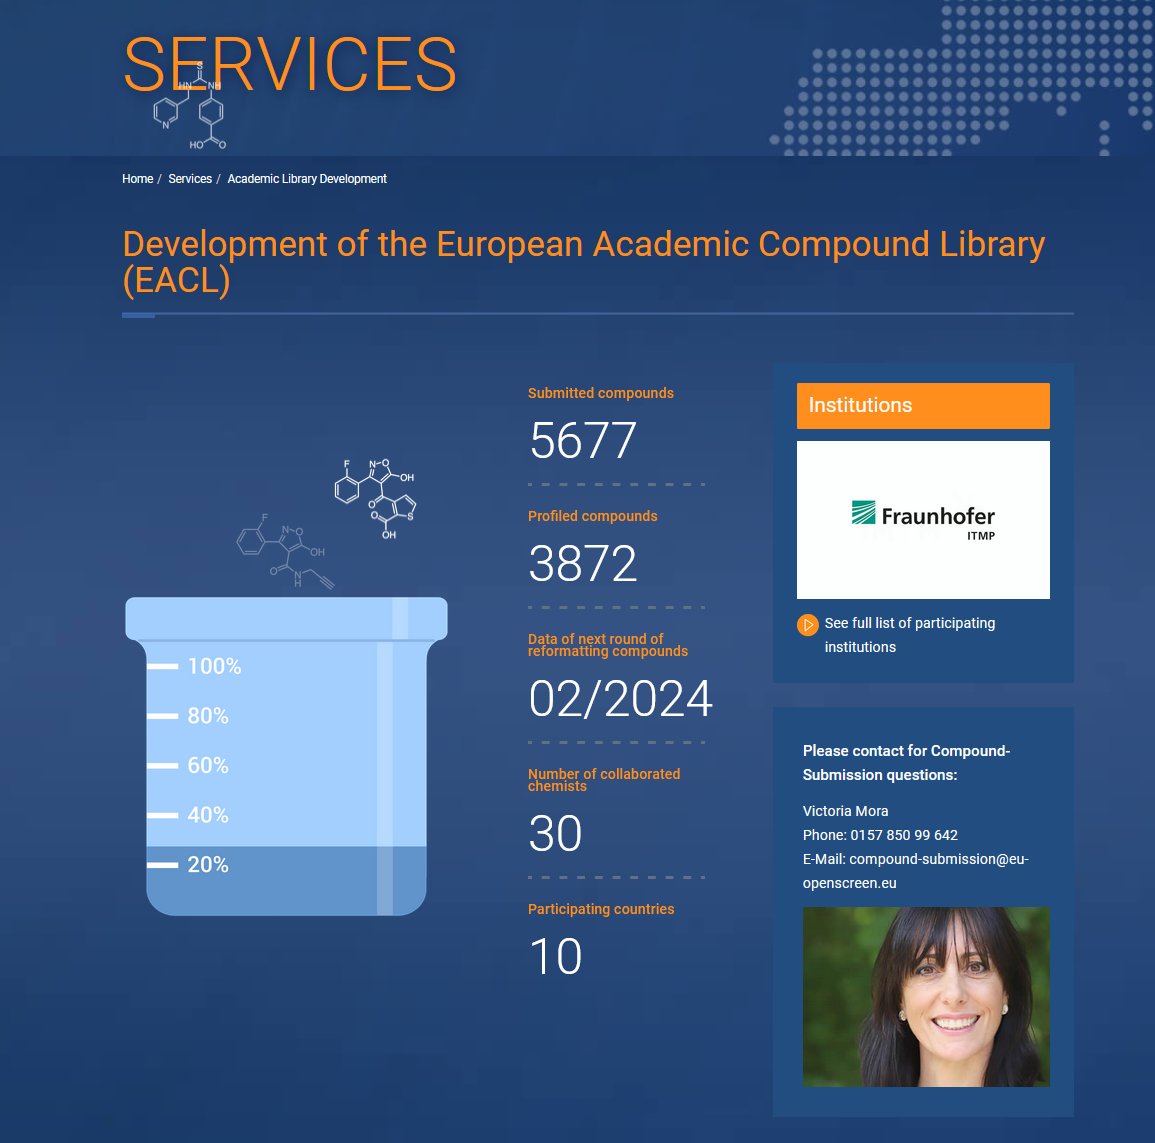 🔬 Calling all chemists! Contribute your compounds to the EU-OPENSCREEN compound collection and join the European Academic Compound Library #EACL. Get rapid feedback on biological activities and unlock collaboration opportunities.tinyurl.com/9sk9ef65 #DrugDiscovery 🌐